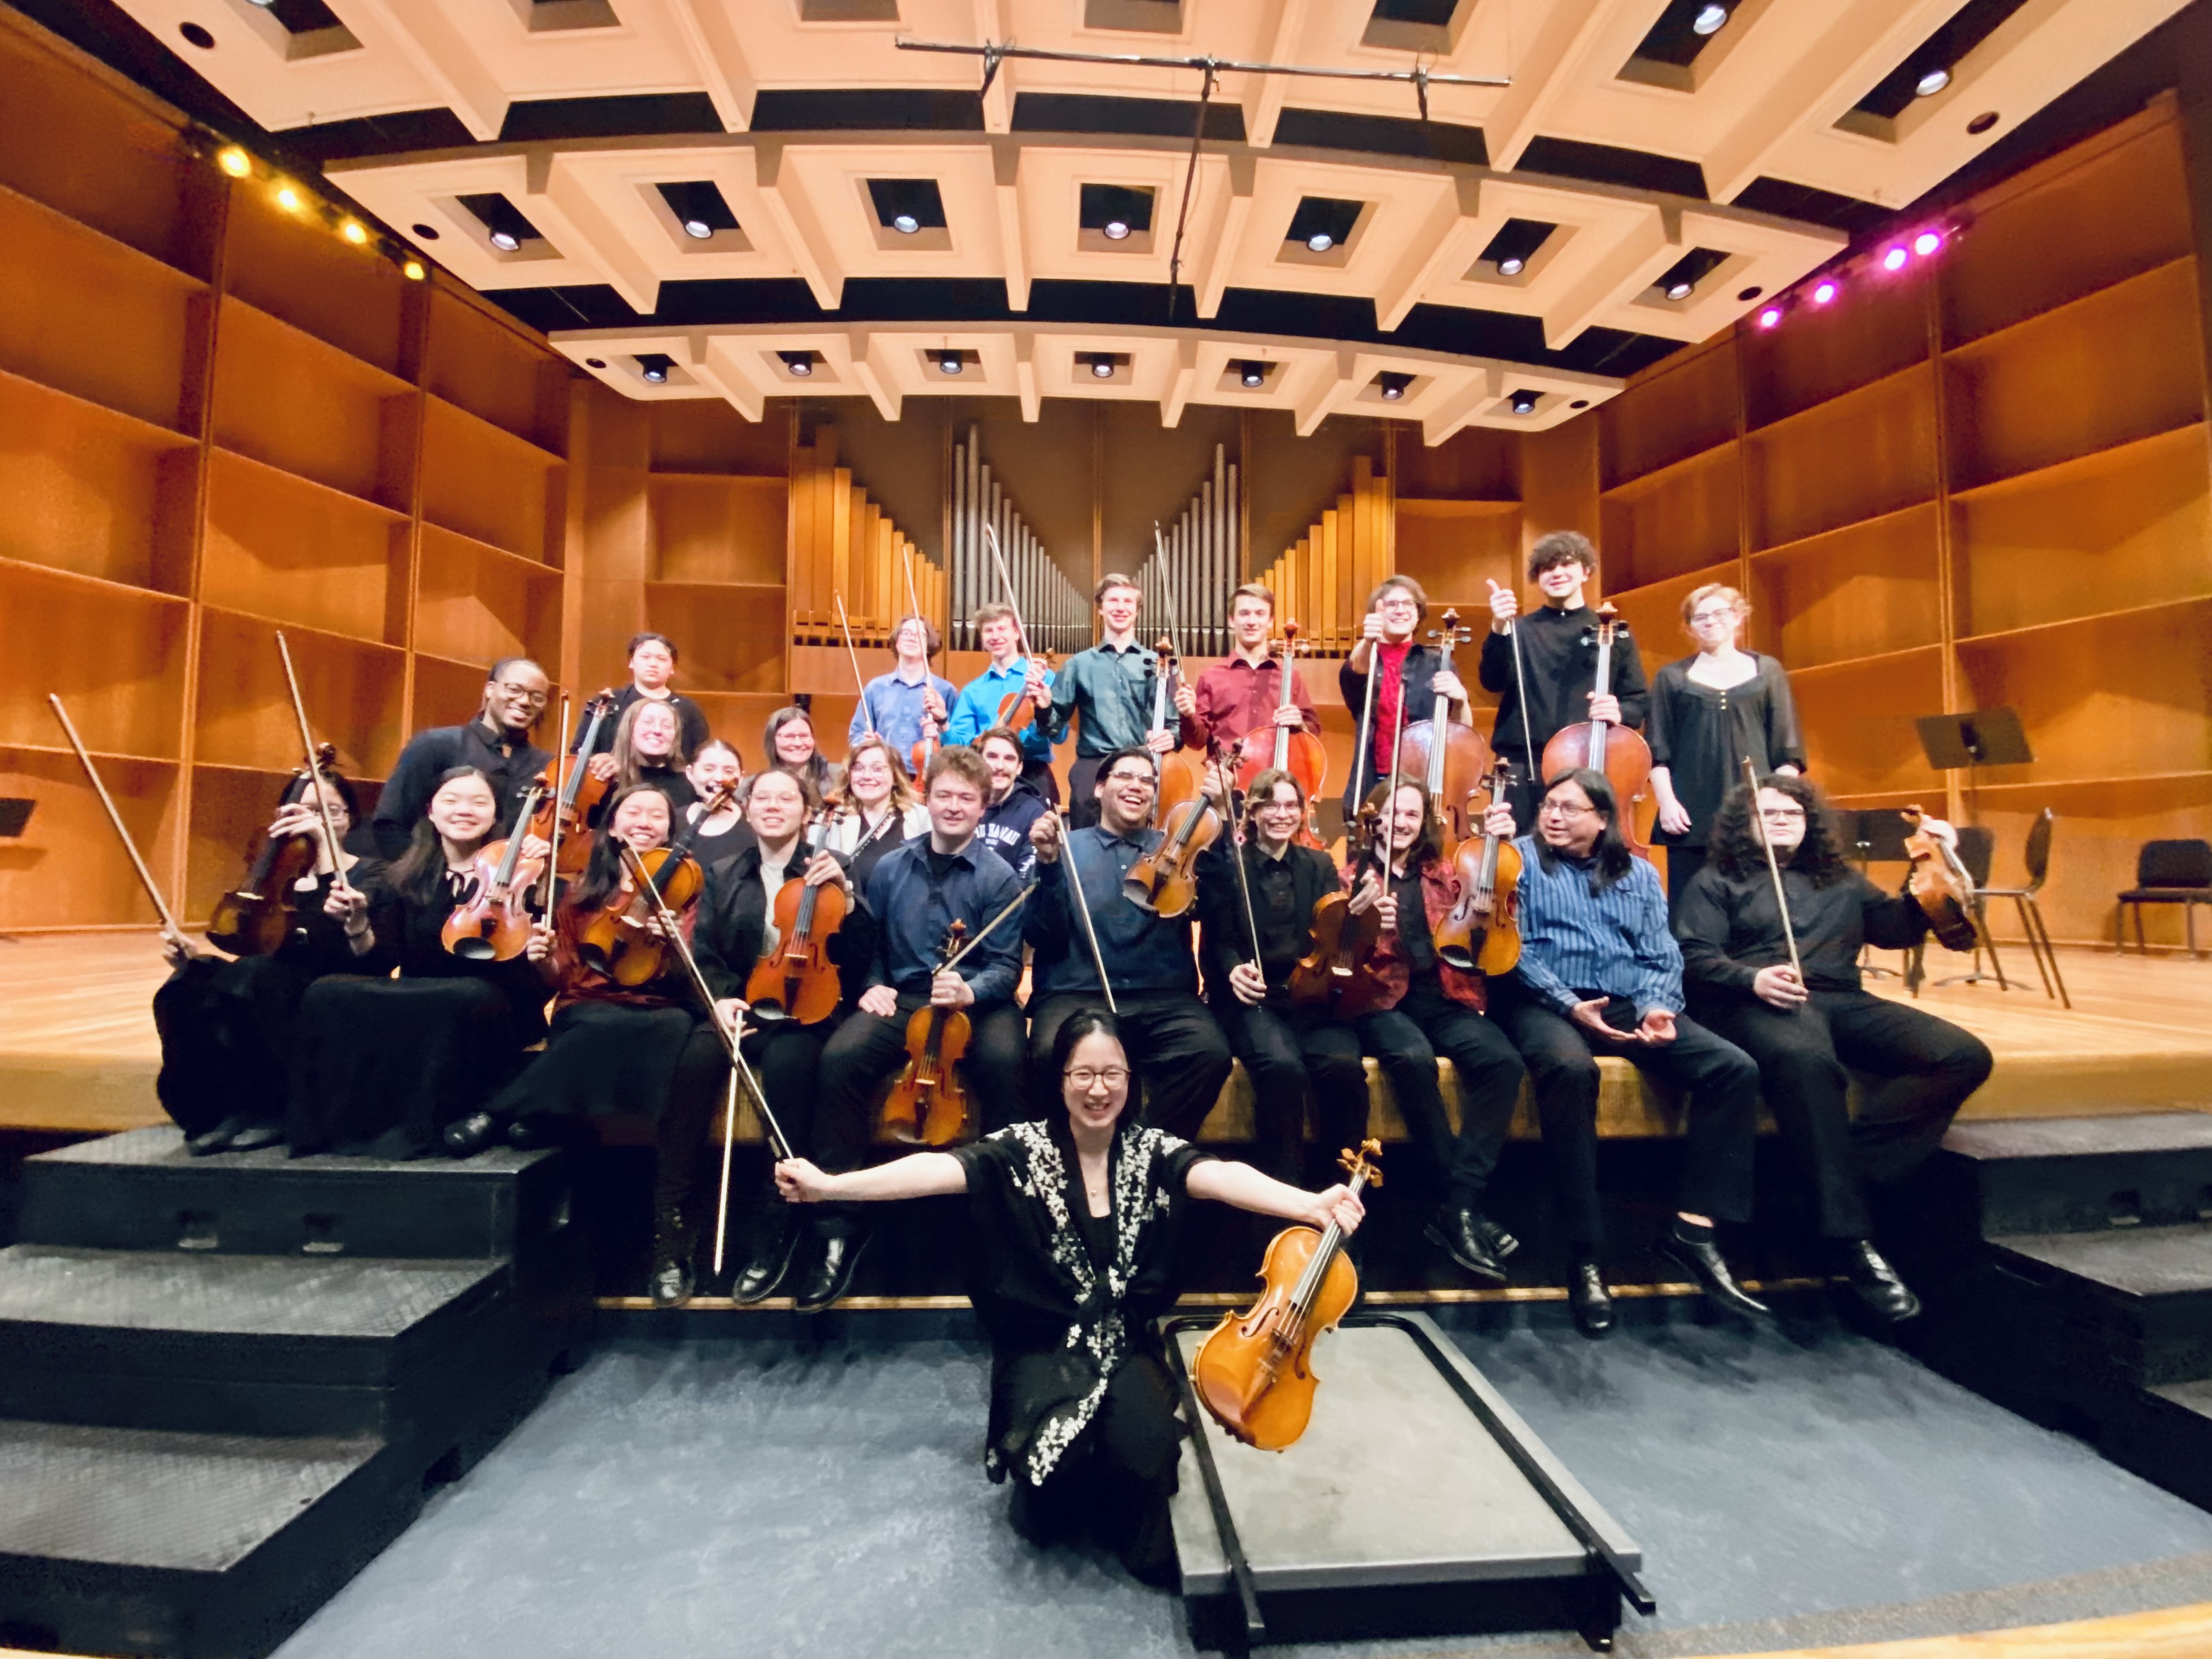 Northern Lights String Orchestra members pose for a photo with their conductor, Yue Sun (center), after a concert in the Davis Concert Hall on April 22, 2022.